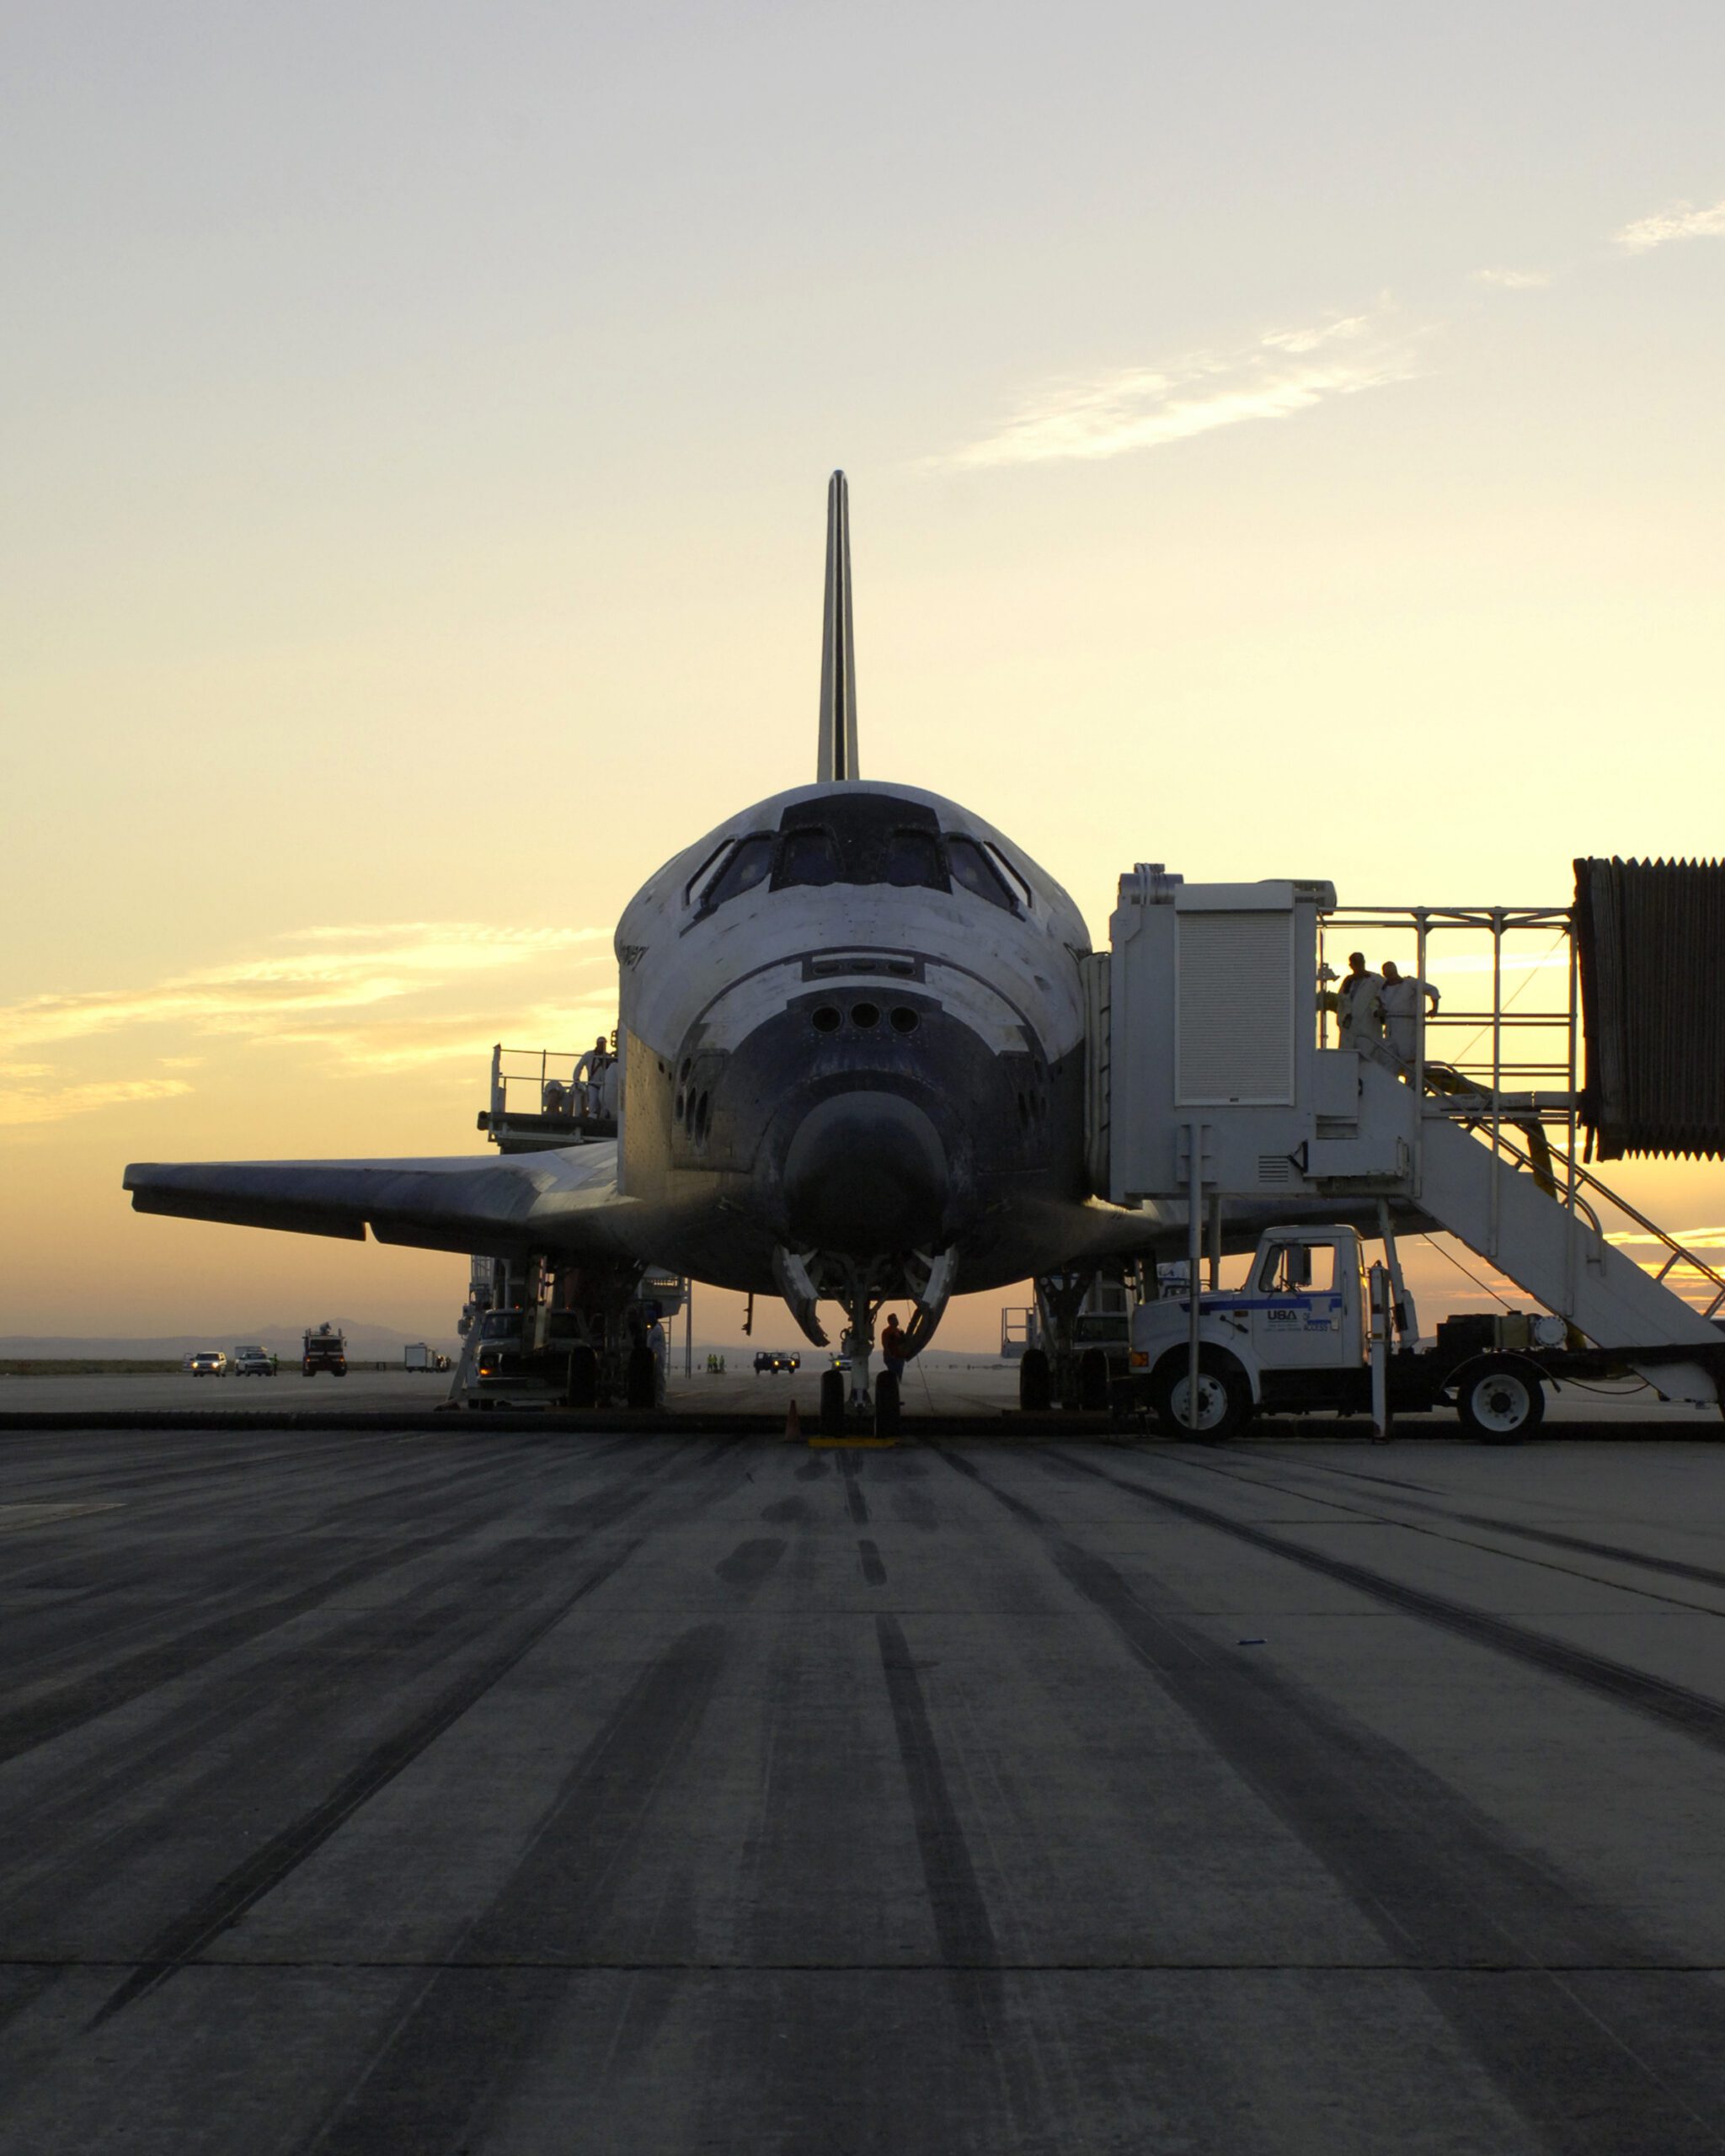 NASA Image of Safety Grooving and Shuttle Discovery